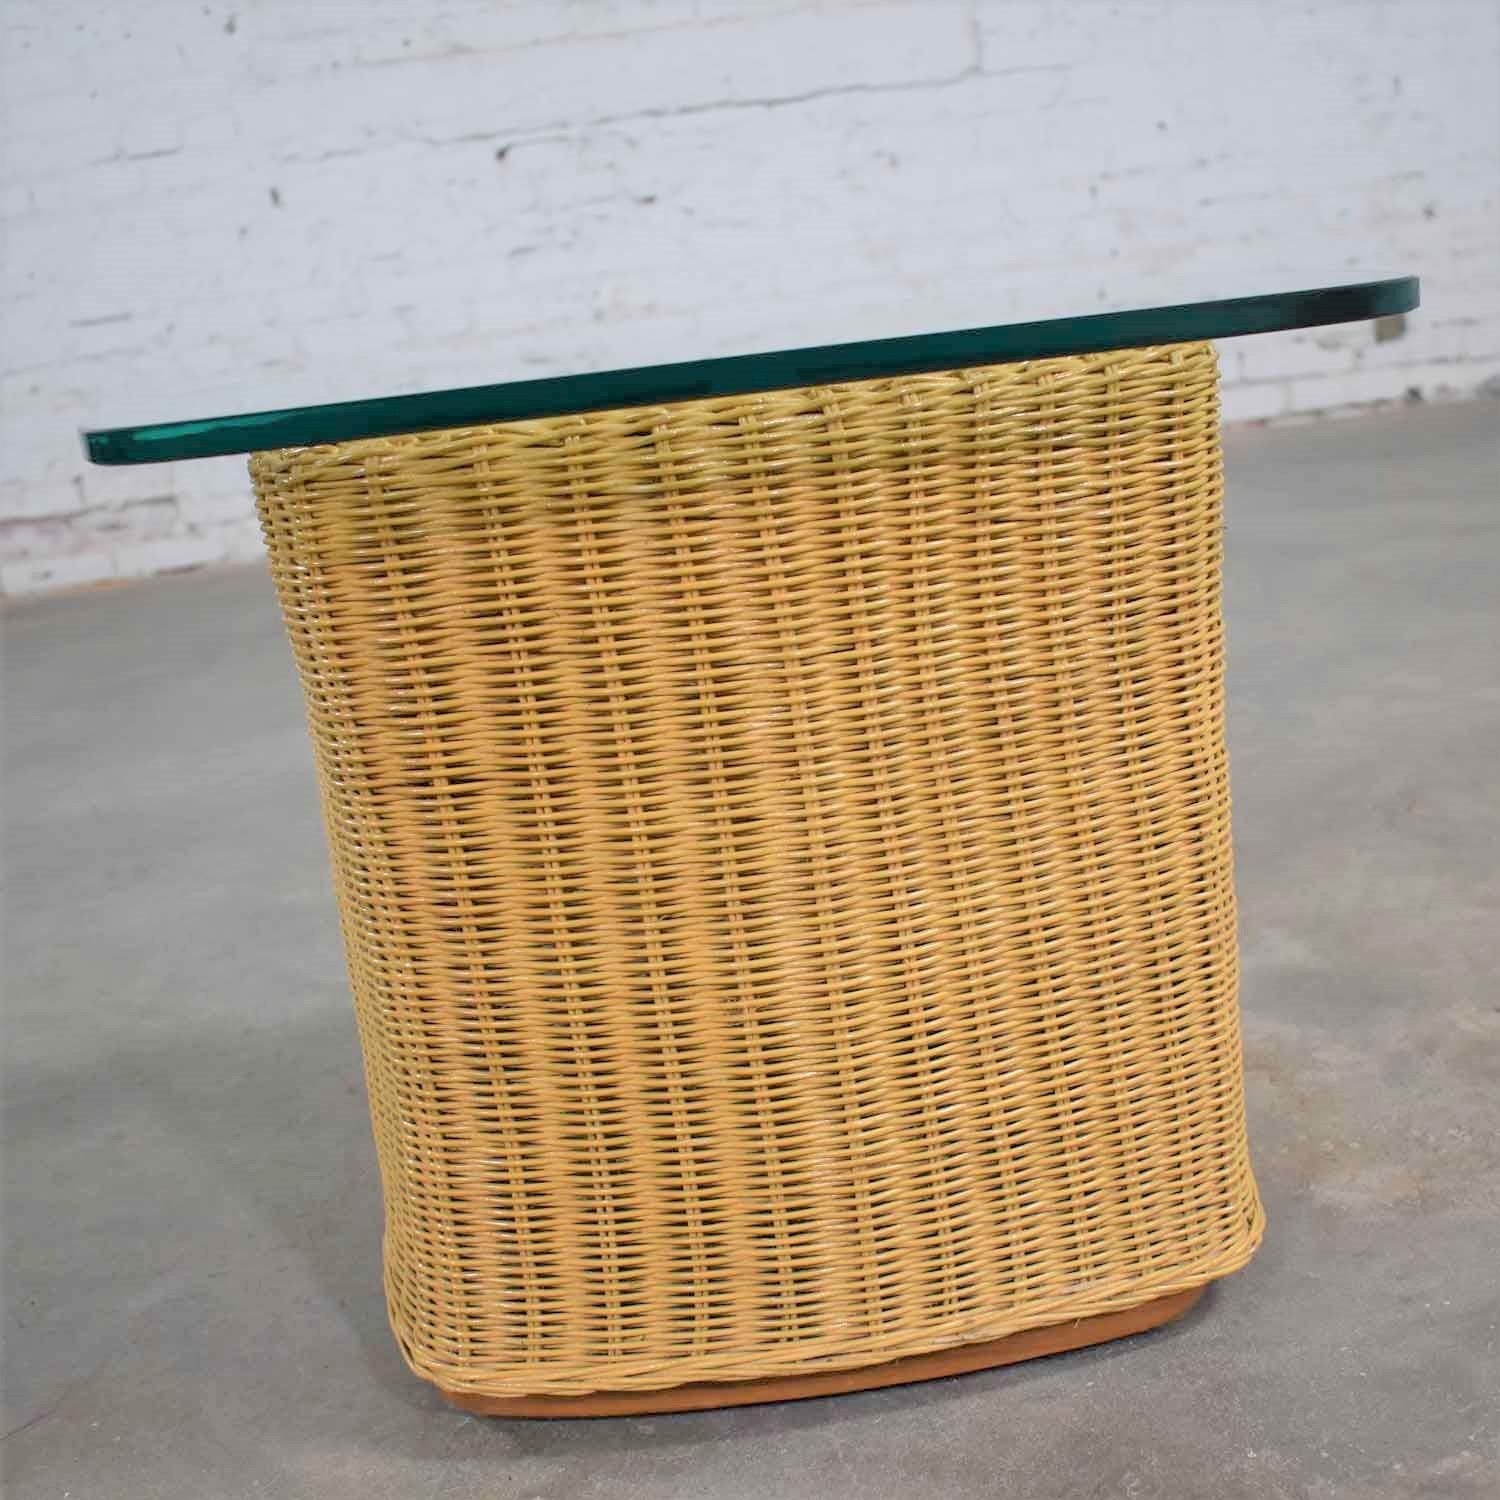 Handsome organic modern rattan wicker side table or end table having a ½ inch thick glass top with an overhang. It is in very good vintage condition with no outstanding flaws we have detected. Please see photos, circa late 20th century.

We found